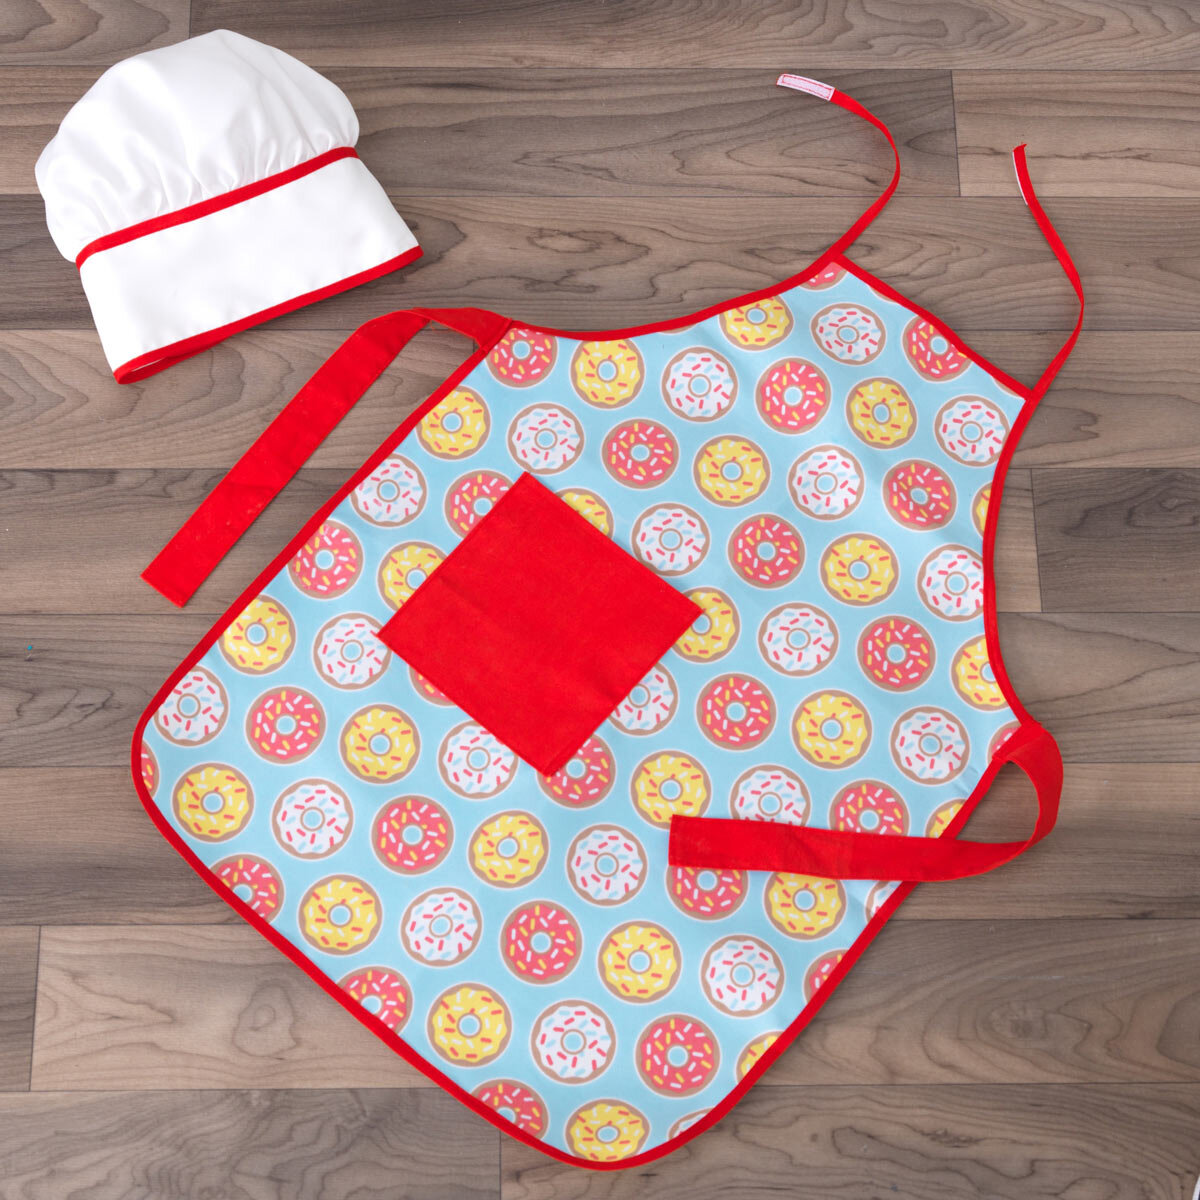 Buy KidKraft Foody Friends Deluxe Activity Center Apron Image at Costco.co.uk